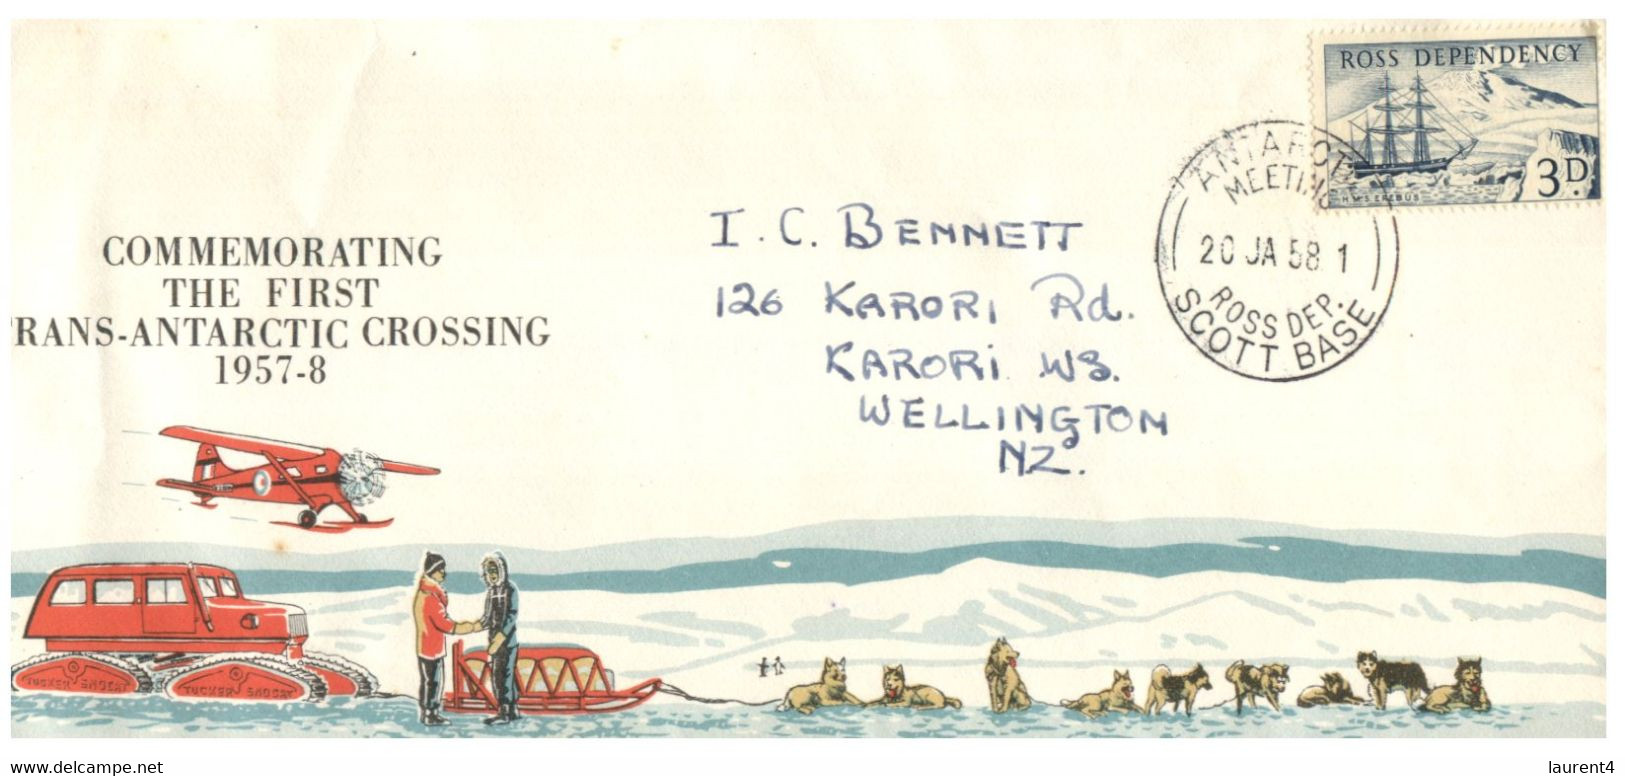 (NN 30) Ross Dependency Cover (New Zealand) - Commemorating The First Trans-Antarctic Crossing 1957-58 - Covers & Documents